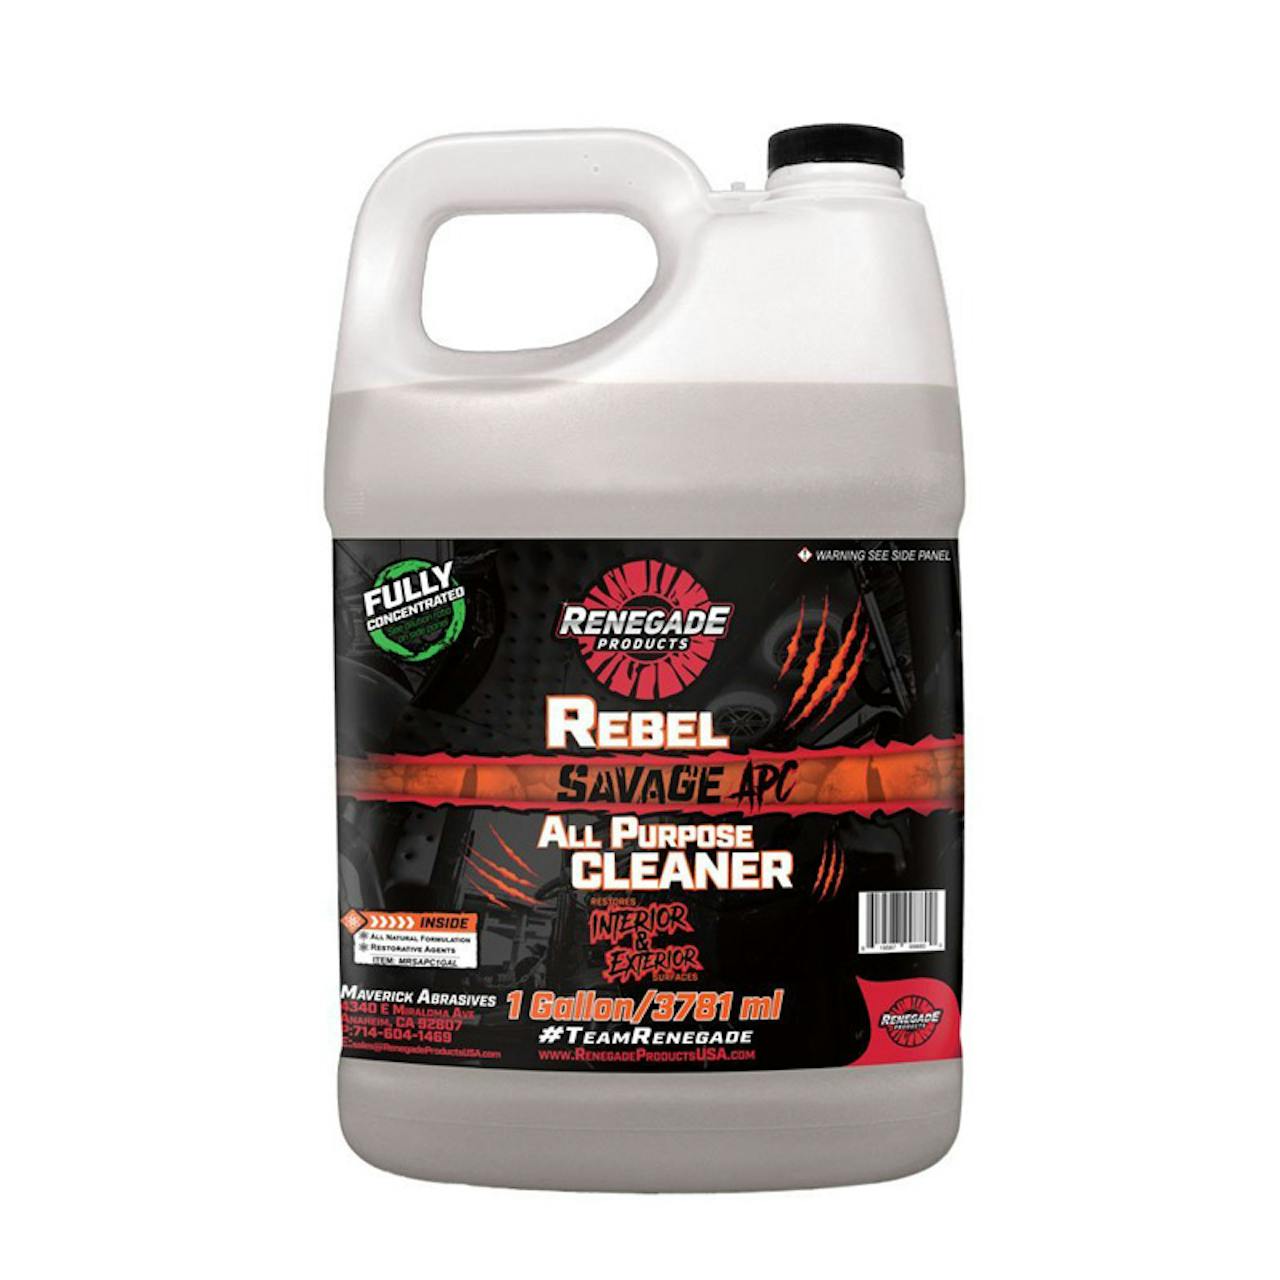 Citrus Safetouch APC (All-Purpose Cleaner) - Renegade Products